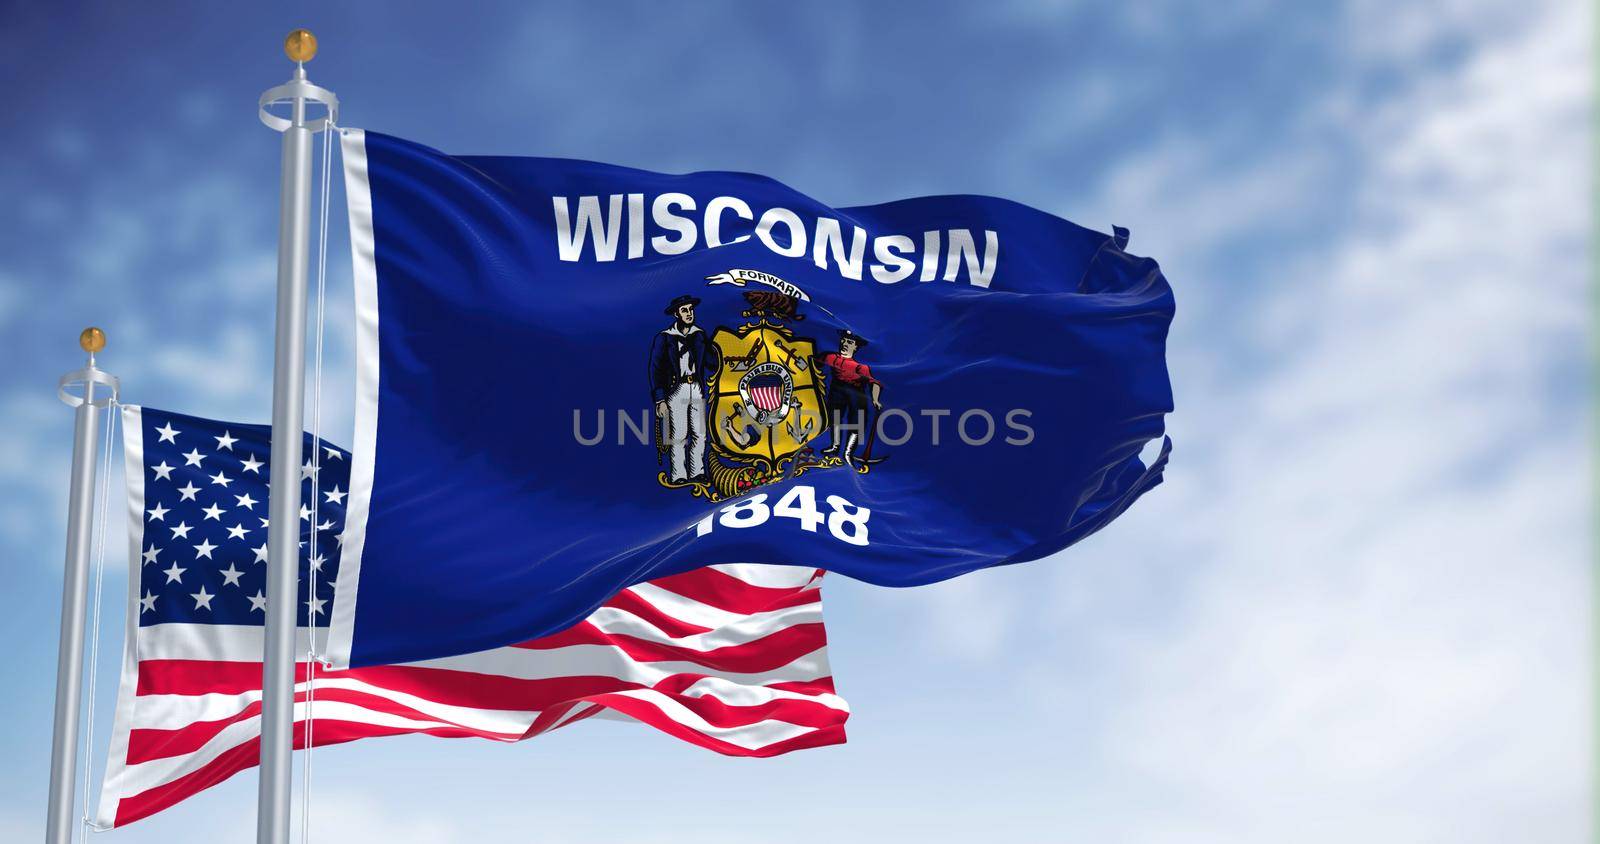 The Wisconsin state flag waving along with the national flag of the United States of America by rarrarorro